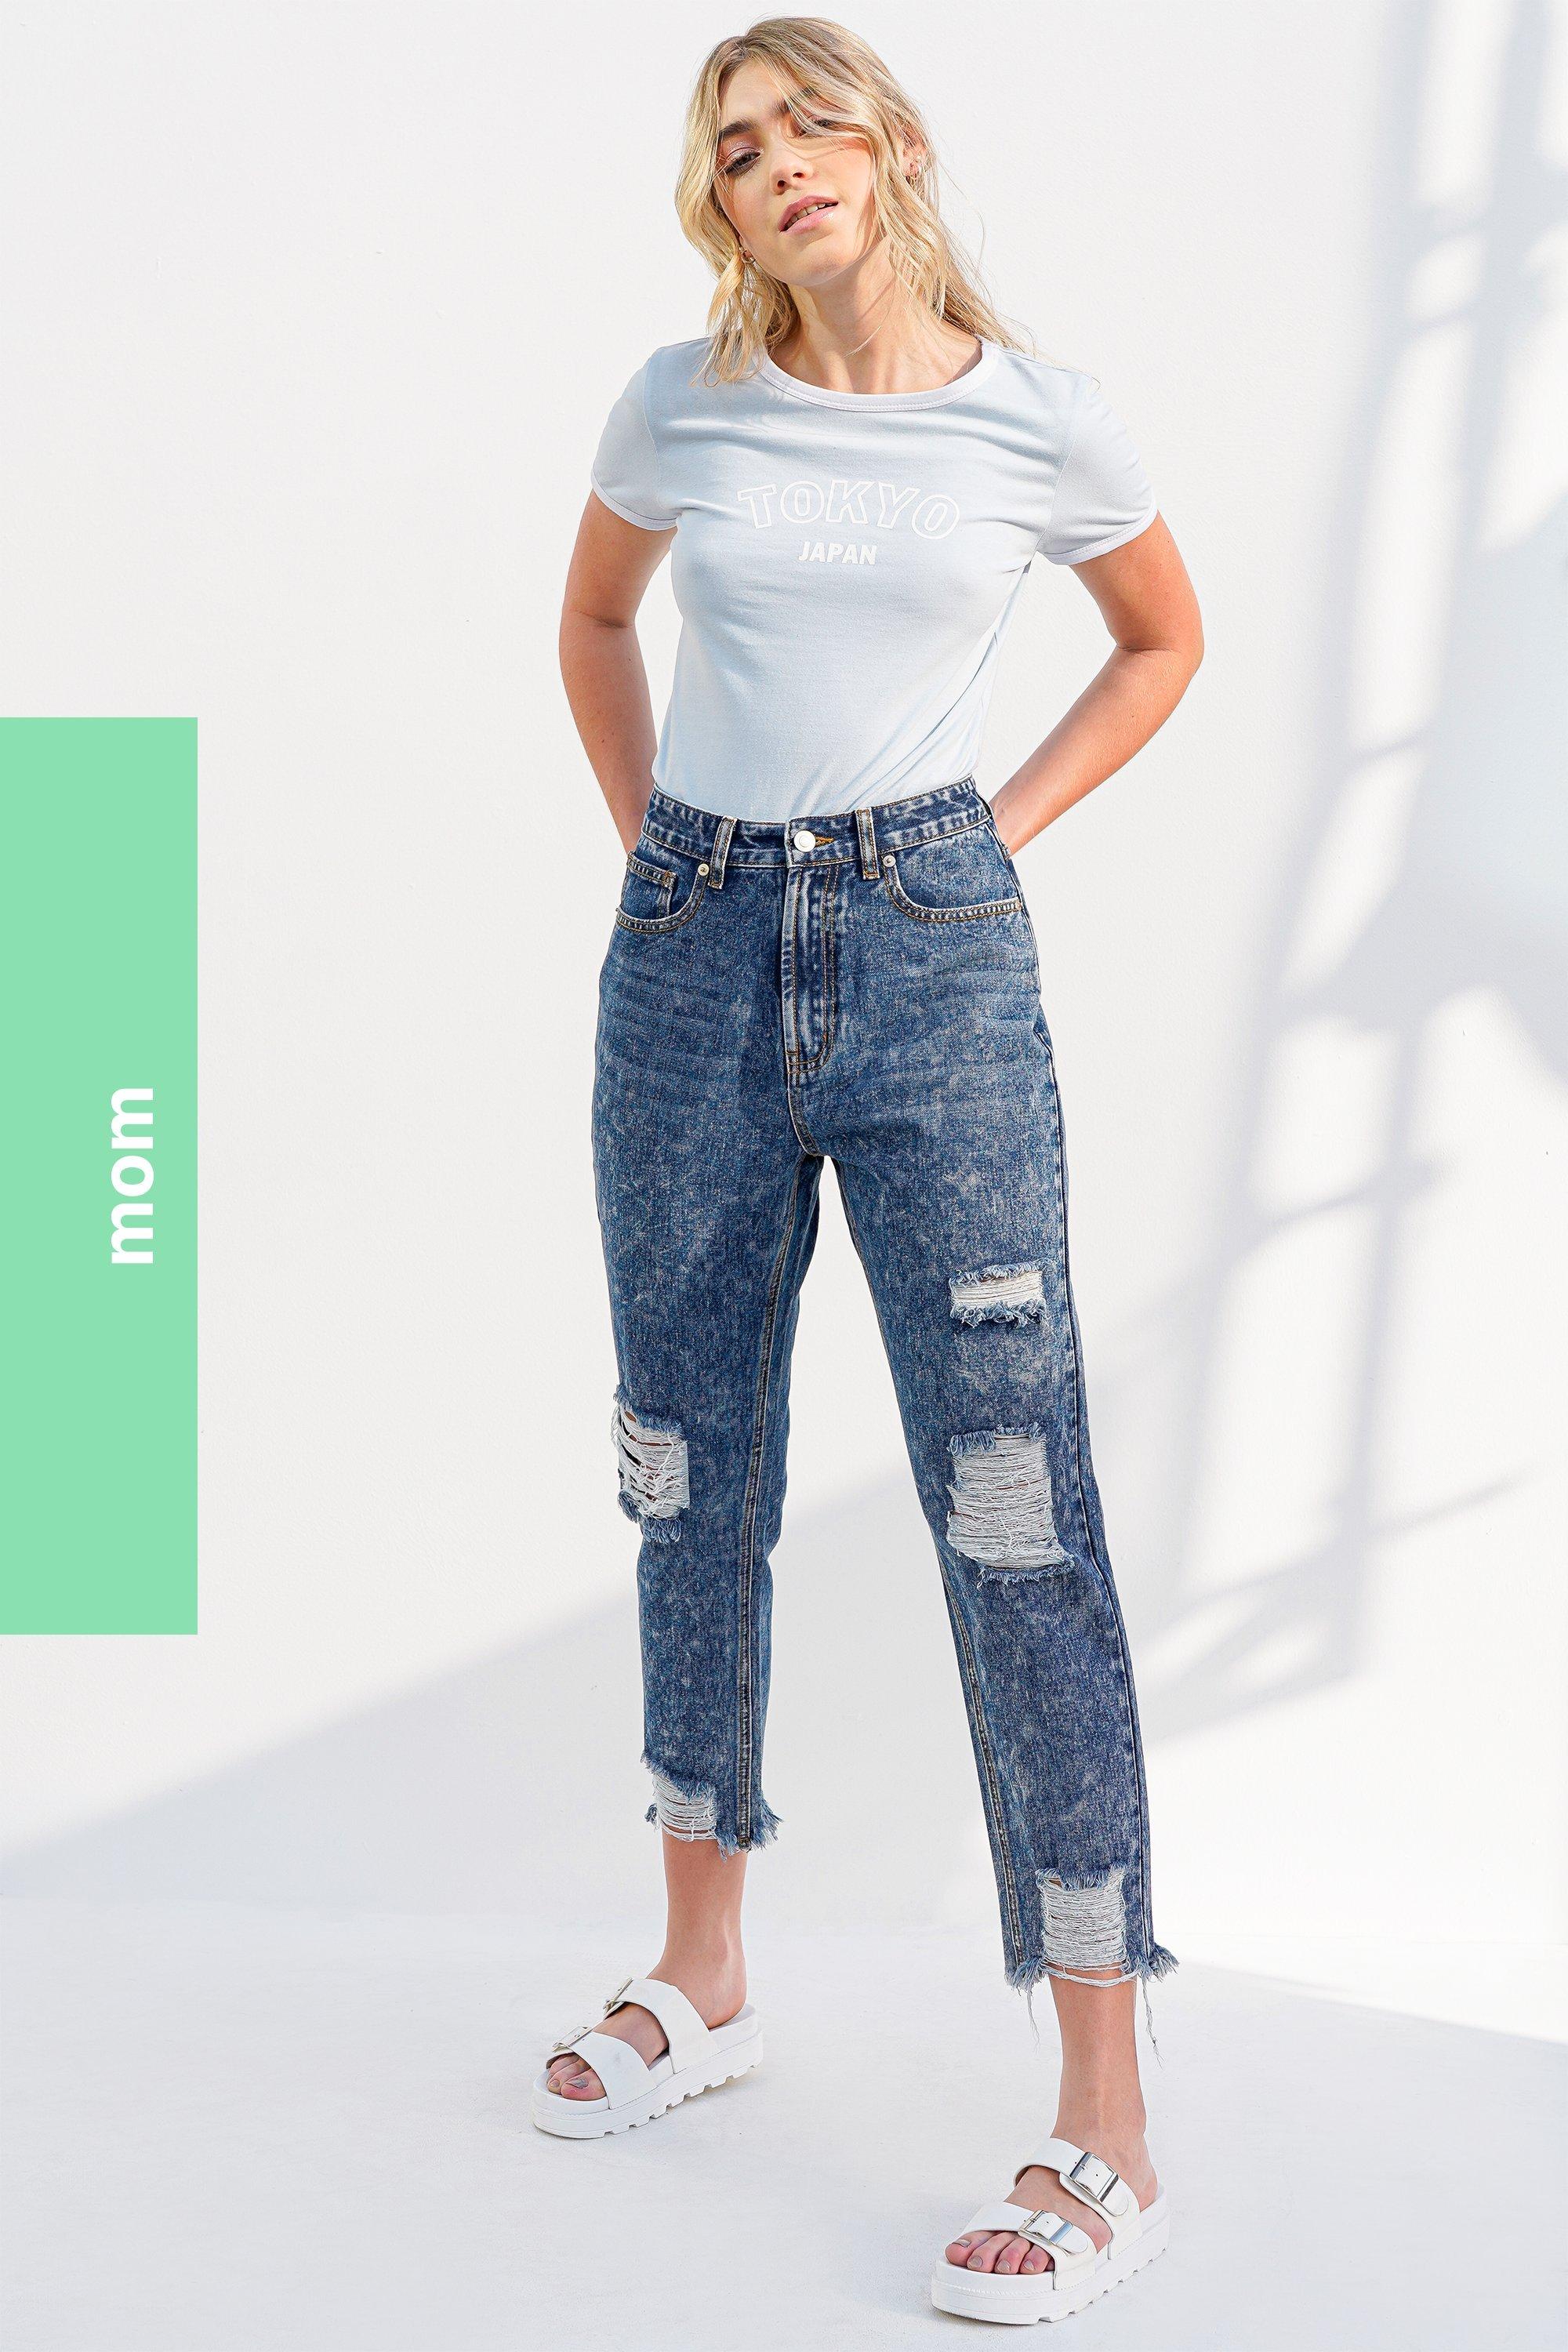 🇲🇾 Mom Jeans Hight👖 Quality Momfit Boyfriend Jeans Hight Quality  Materials🔥